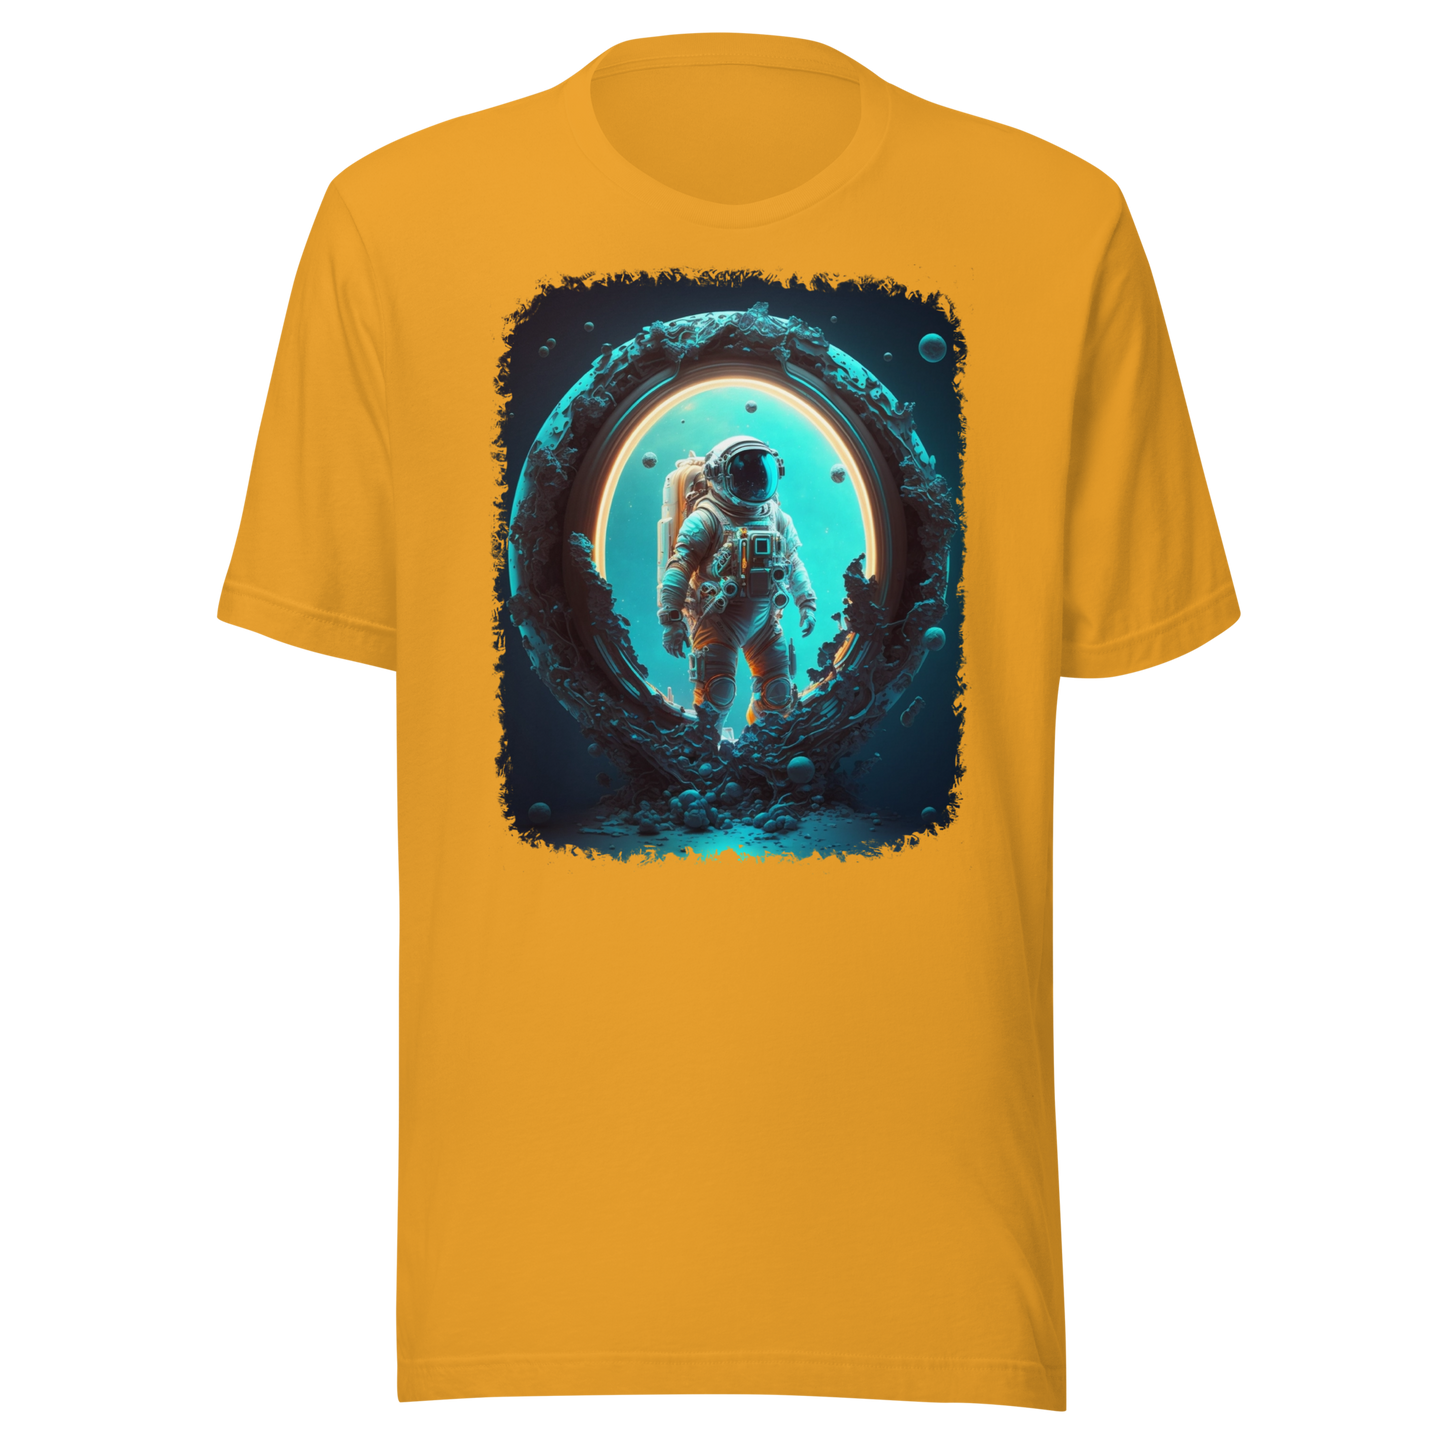 Cosmic Adventure Awaits with Our Unisex Astronaut T-Shirt!